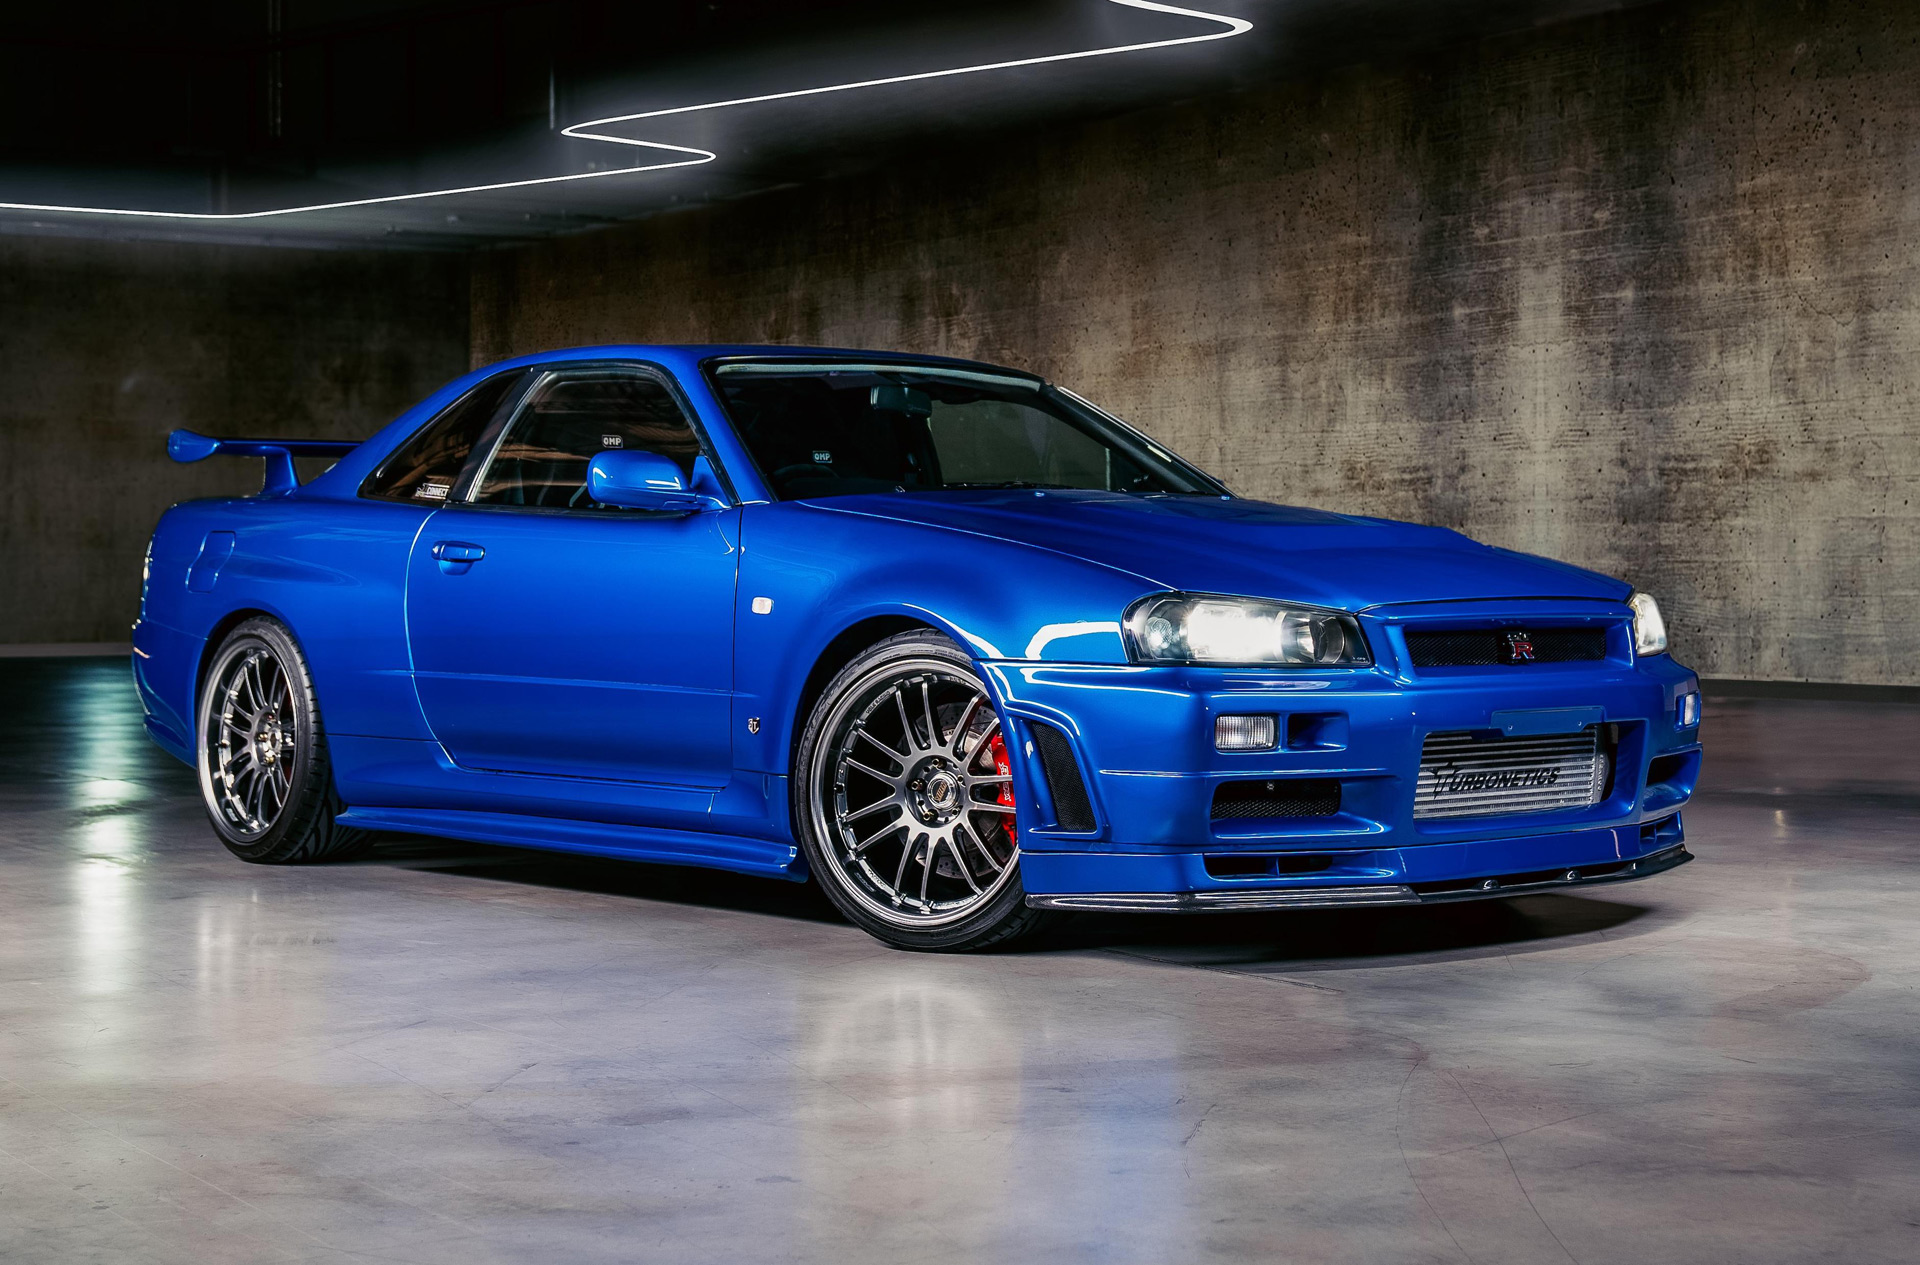 Nissan Skyline GT-R driven by Paul Walker in “Fast and Furious 4” can be yours Auto Recent